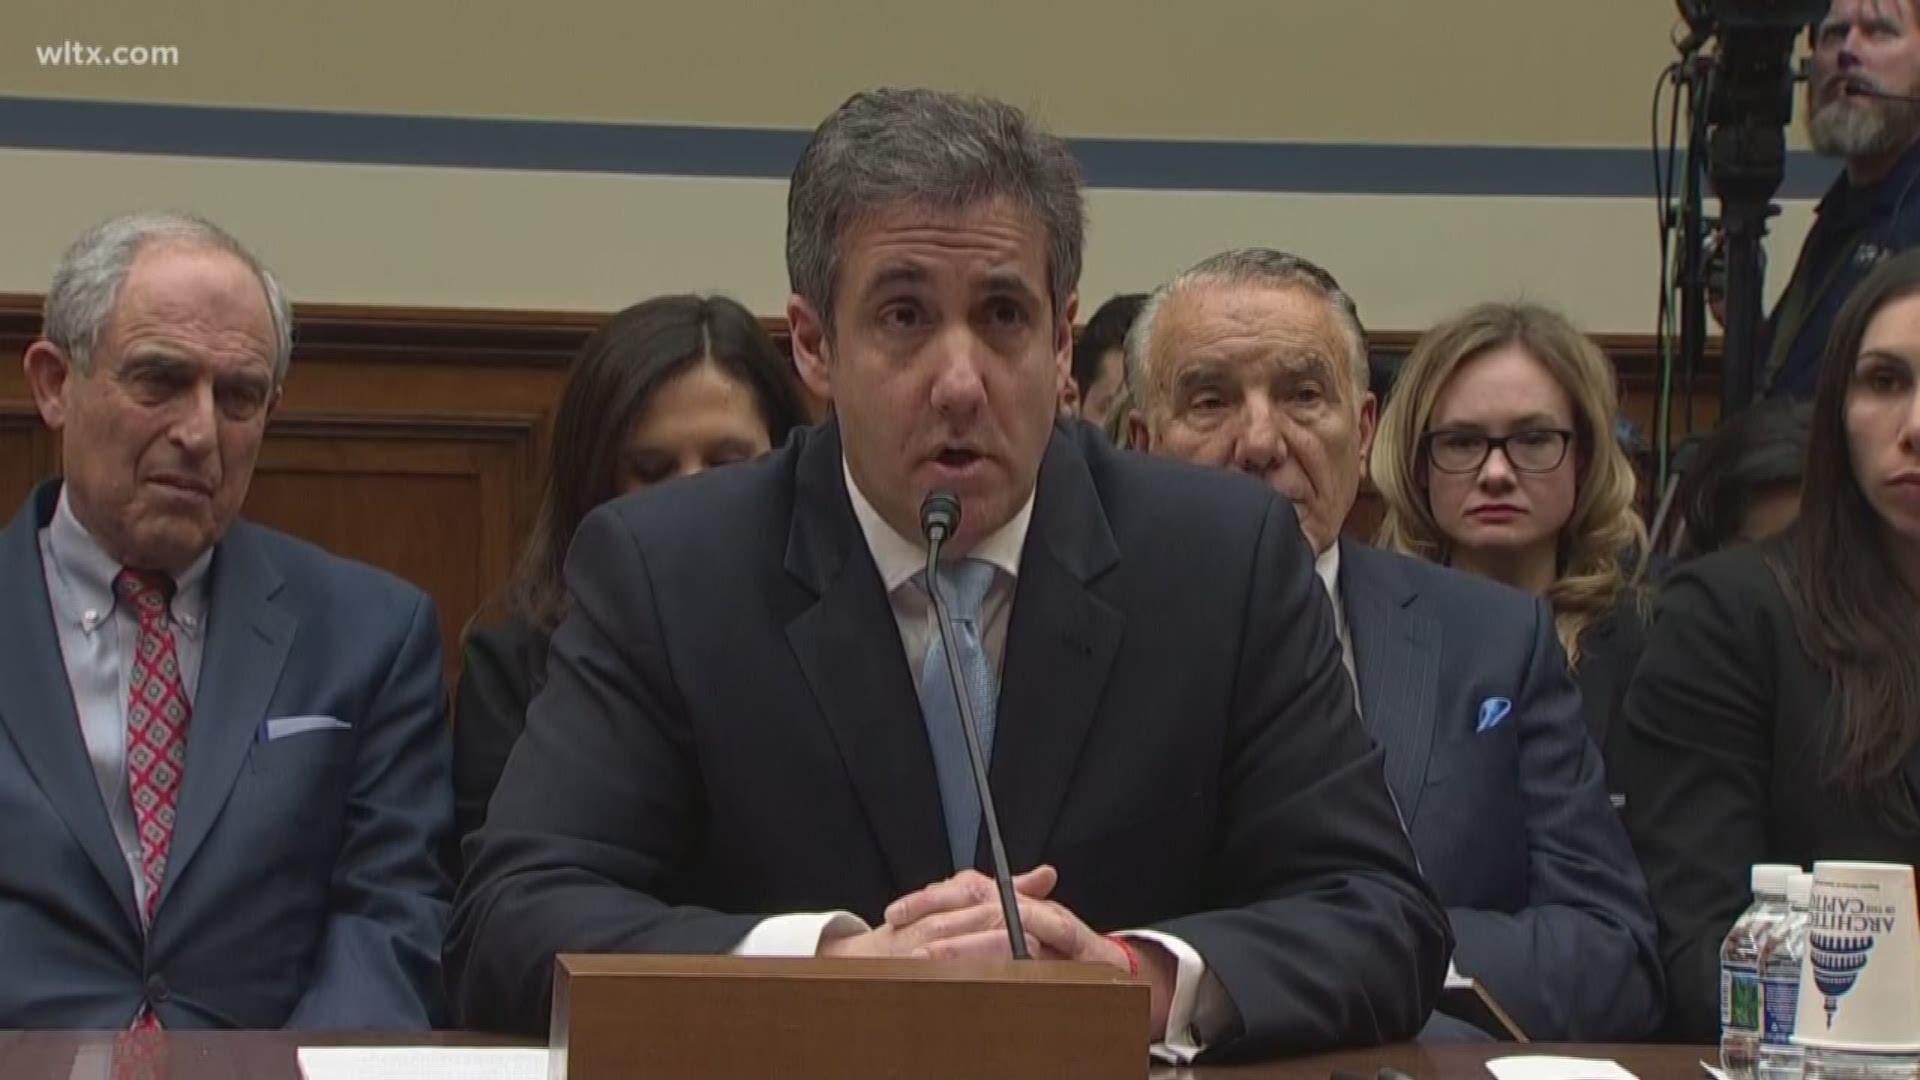 Michael Cohen, President Trump's former personal attorney, testified about the president before a U.S. House committee on February 27, 2019. Here are his responses to questions by Rep. Jim Jordan (R-Ohio).